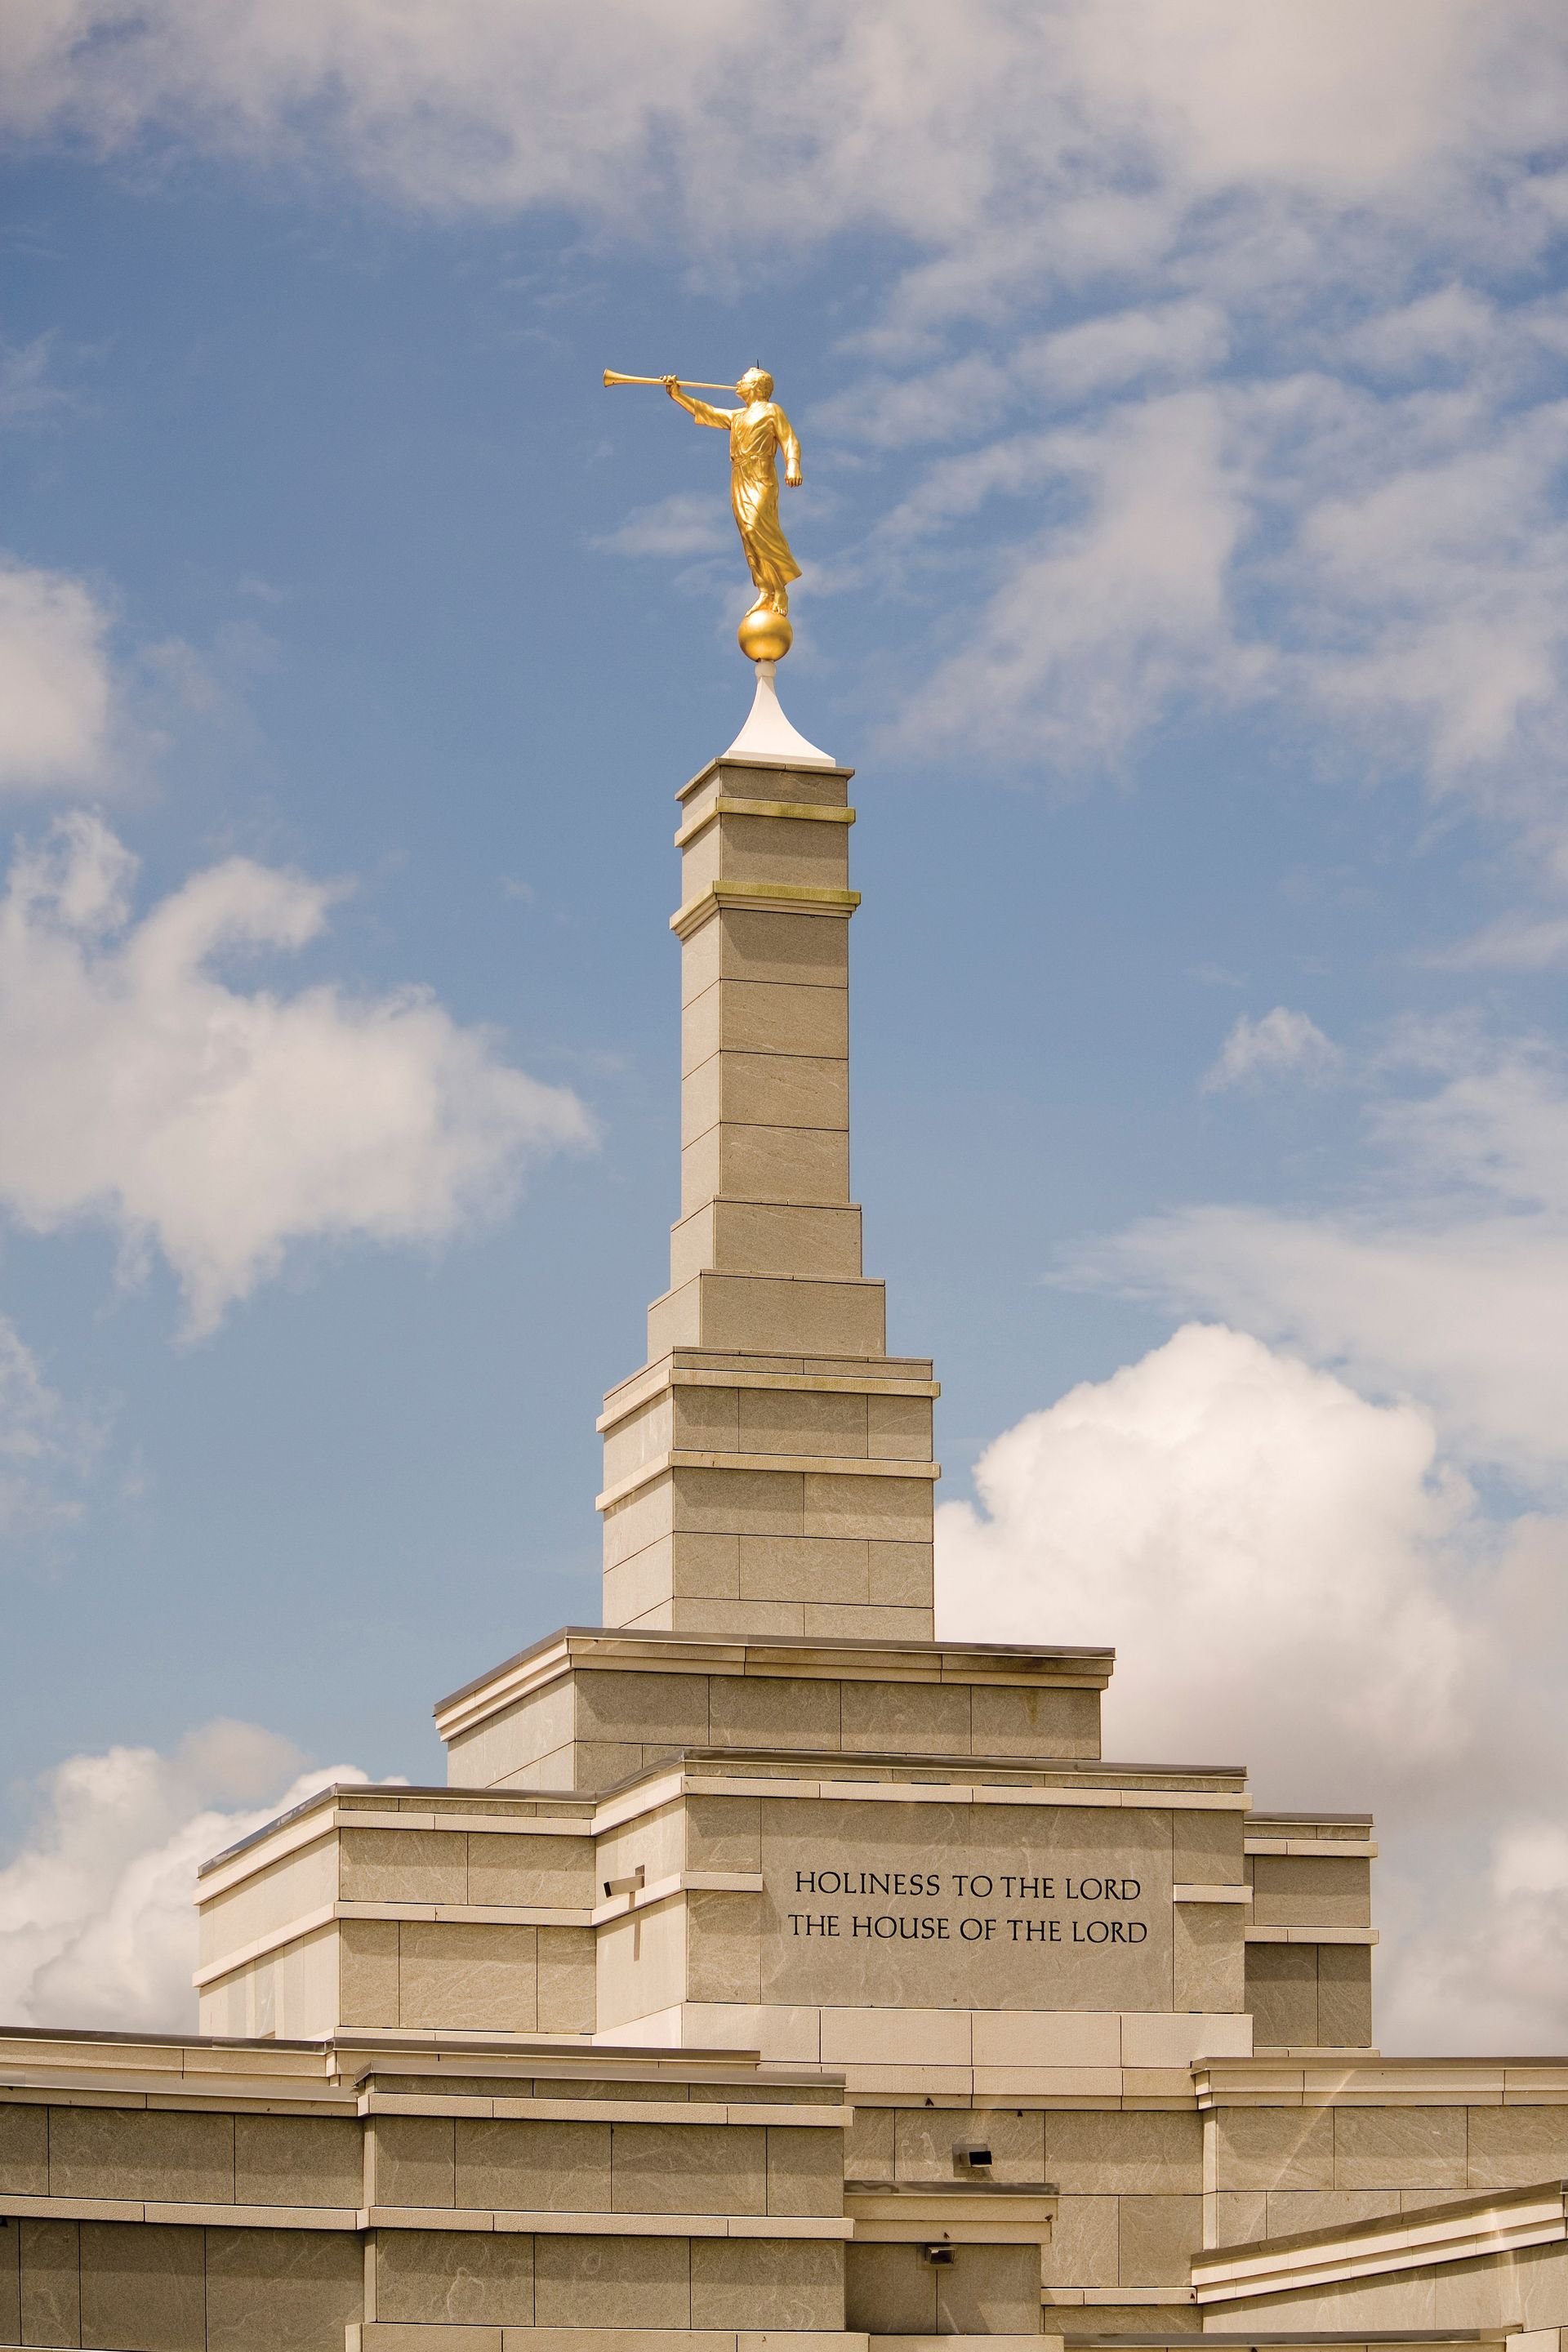 The statue of the angel Moroni stands on top of the spire of the temple.